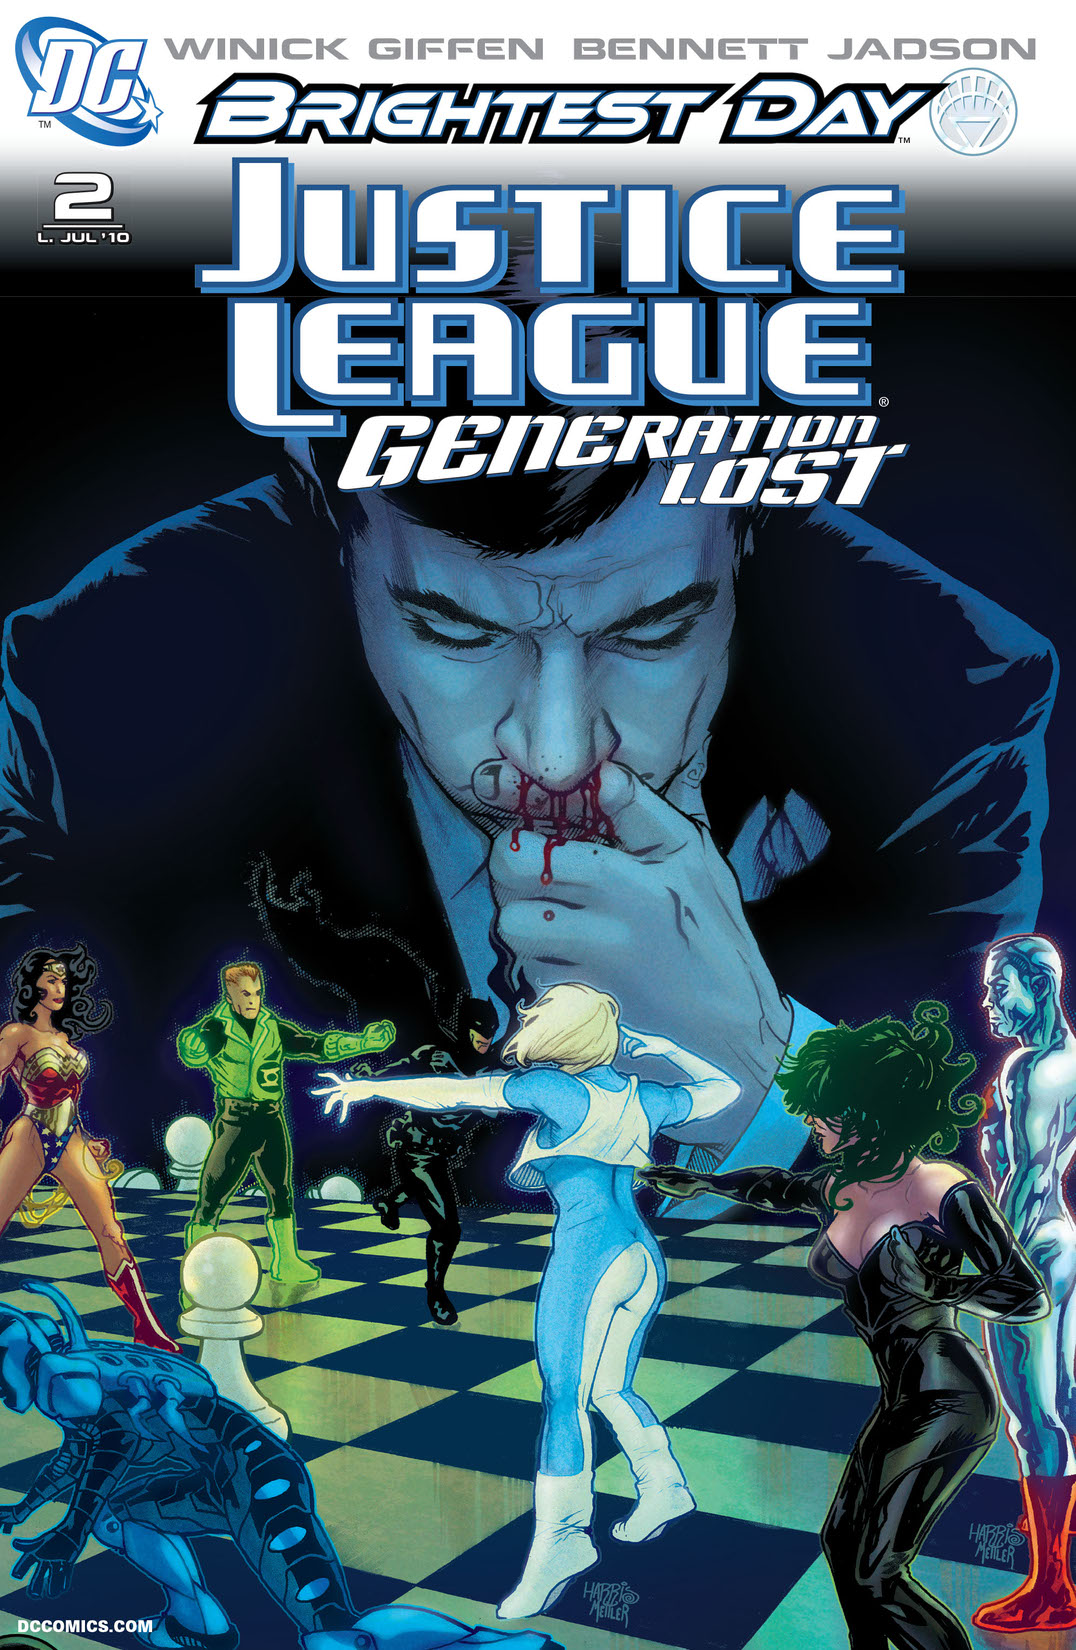 Justice League: Generation Lost #2 preview images